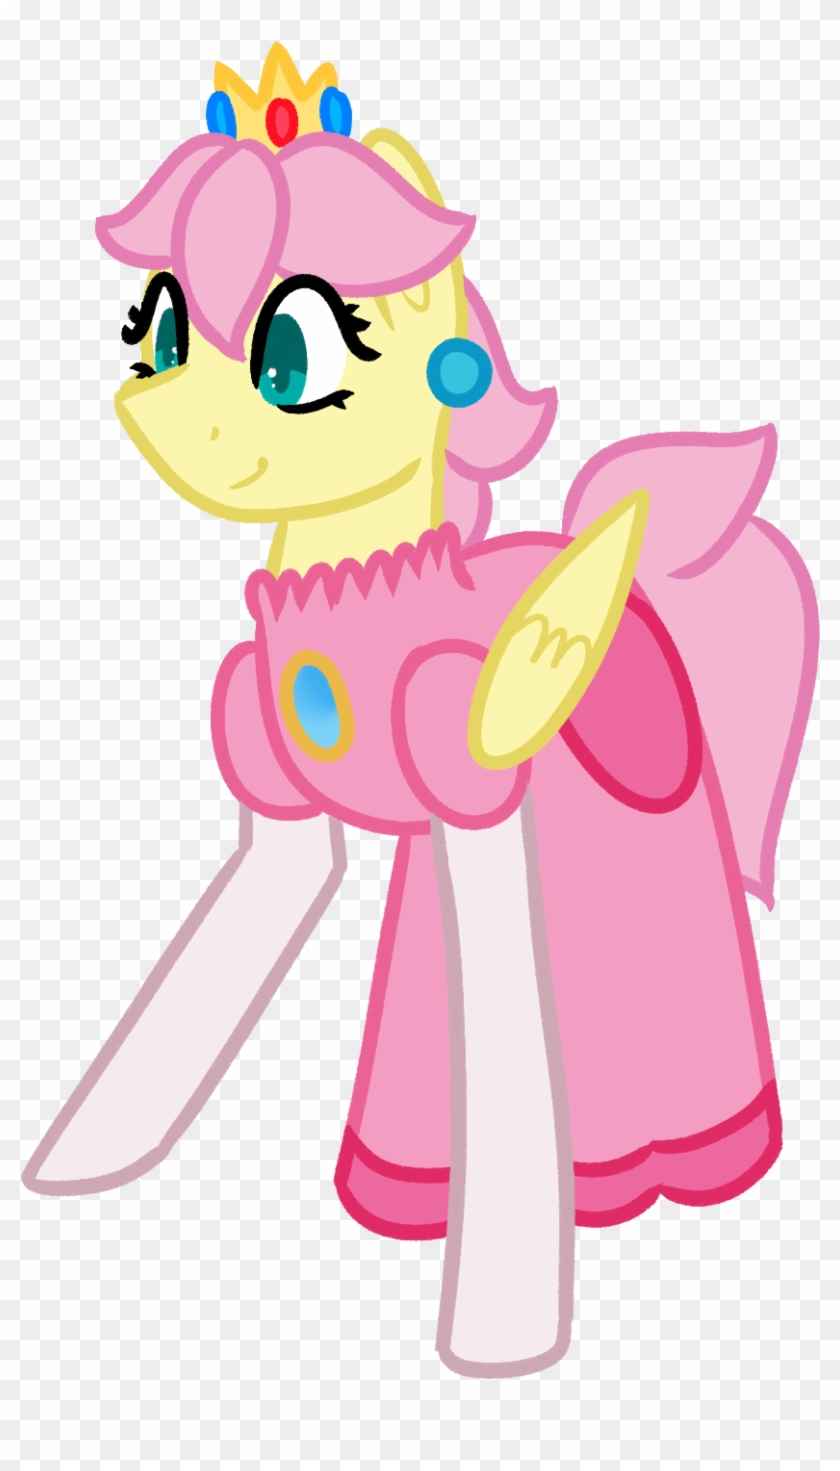 Princess Peach Clipart Costume Homemade - Fluttershy As Princess Peach - Png Download #783737